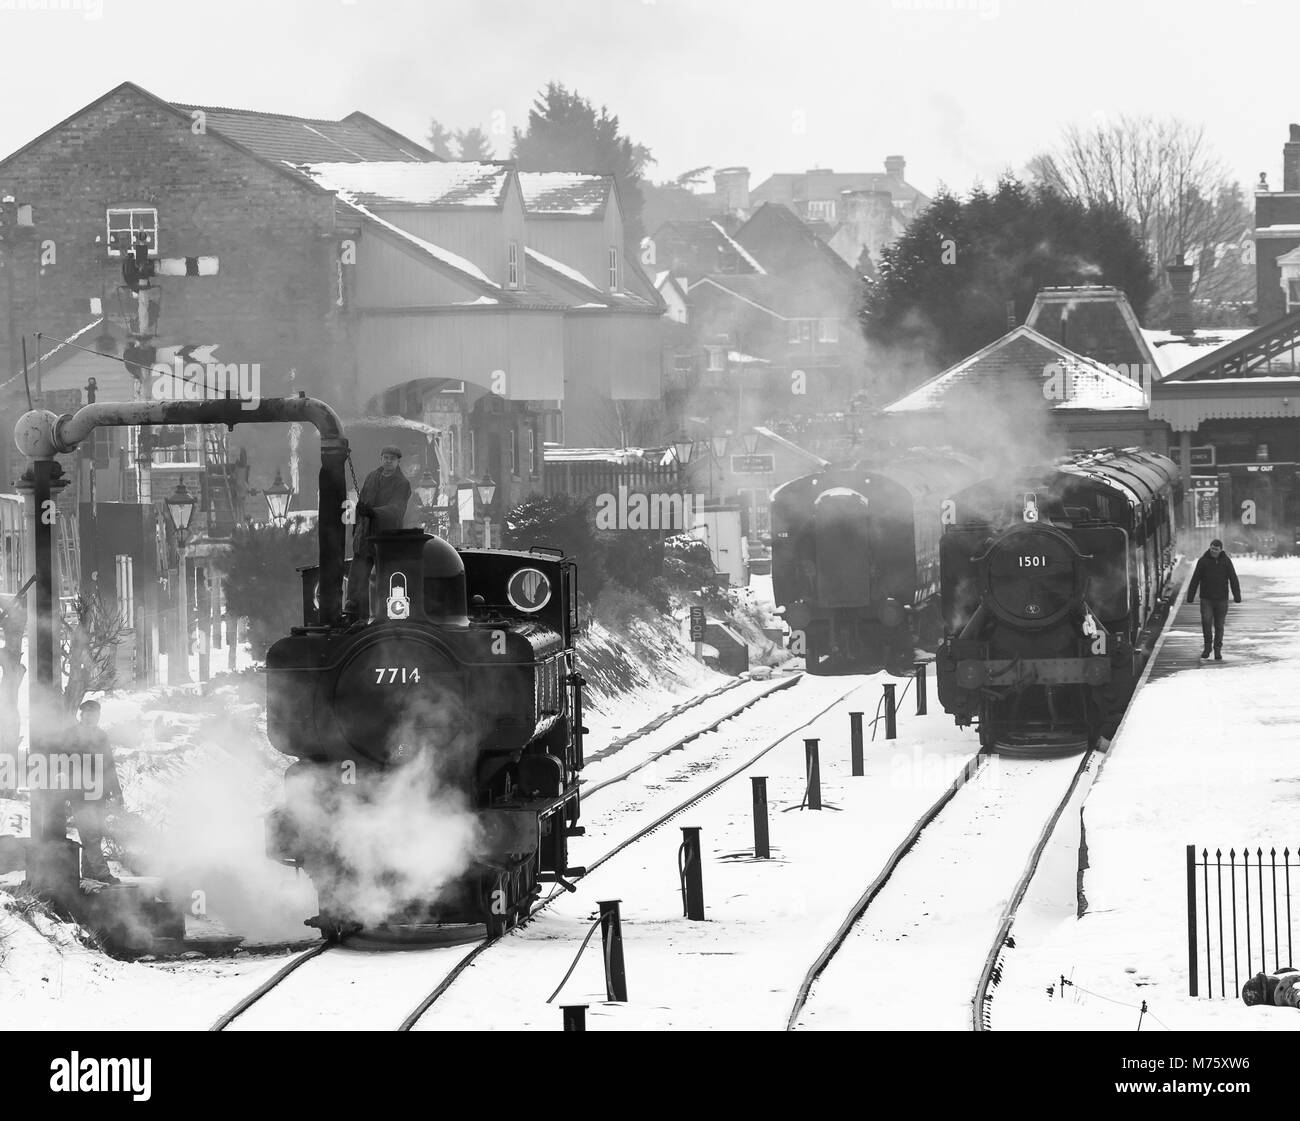 Black & white view of morning preparations, Severn Valley Railway, Kidderminster in the snow. Full steam ahead for trains despite winter snow on track. Stock Photo